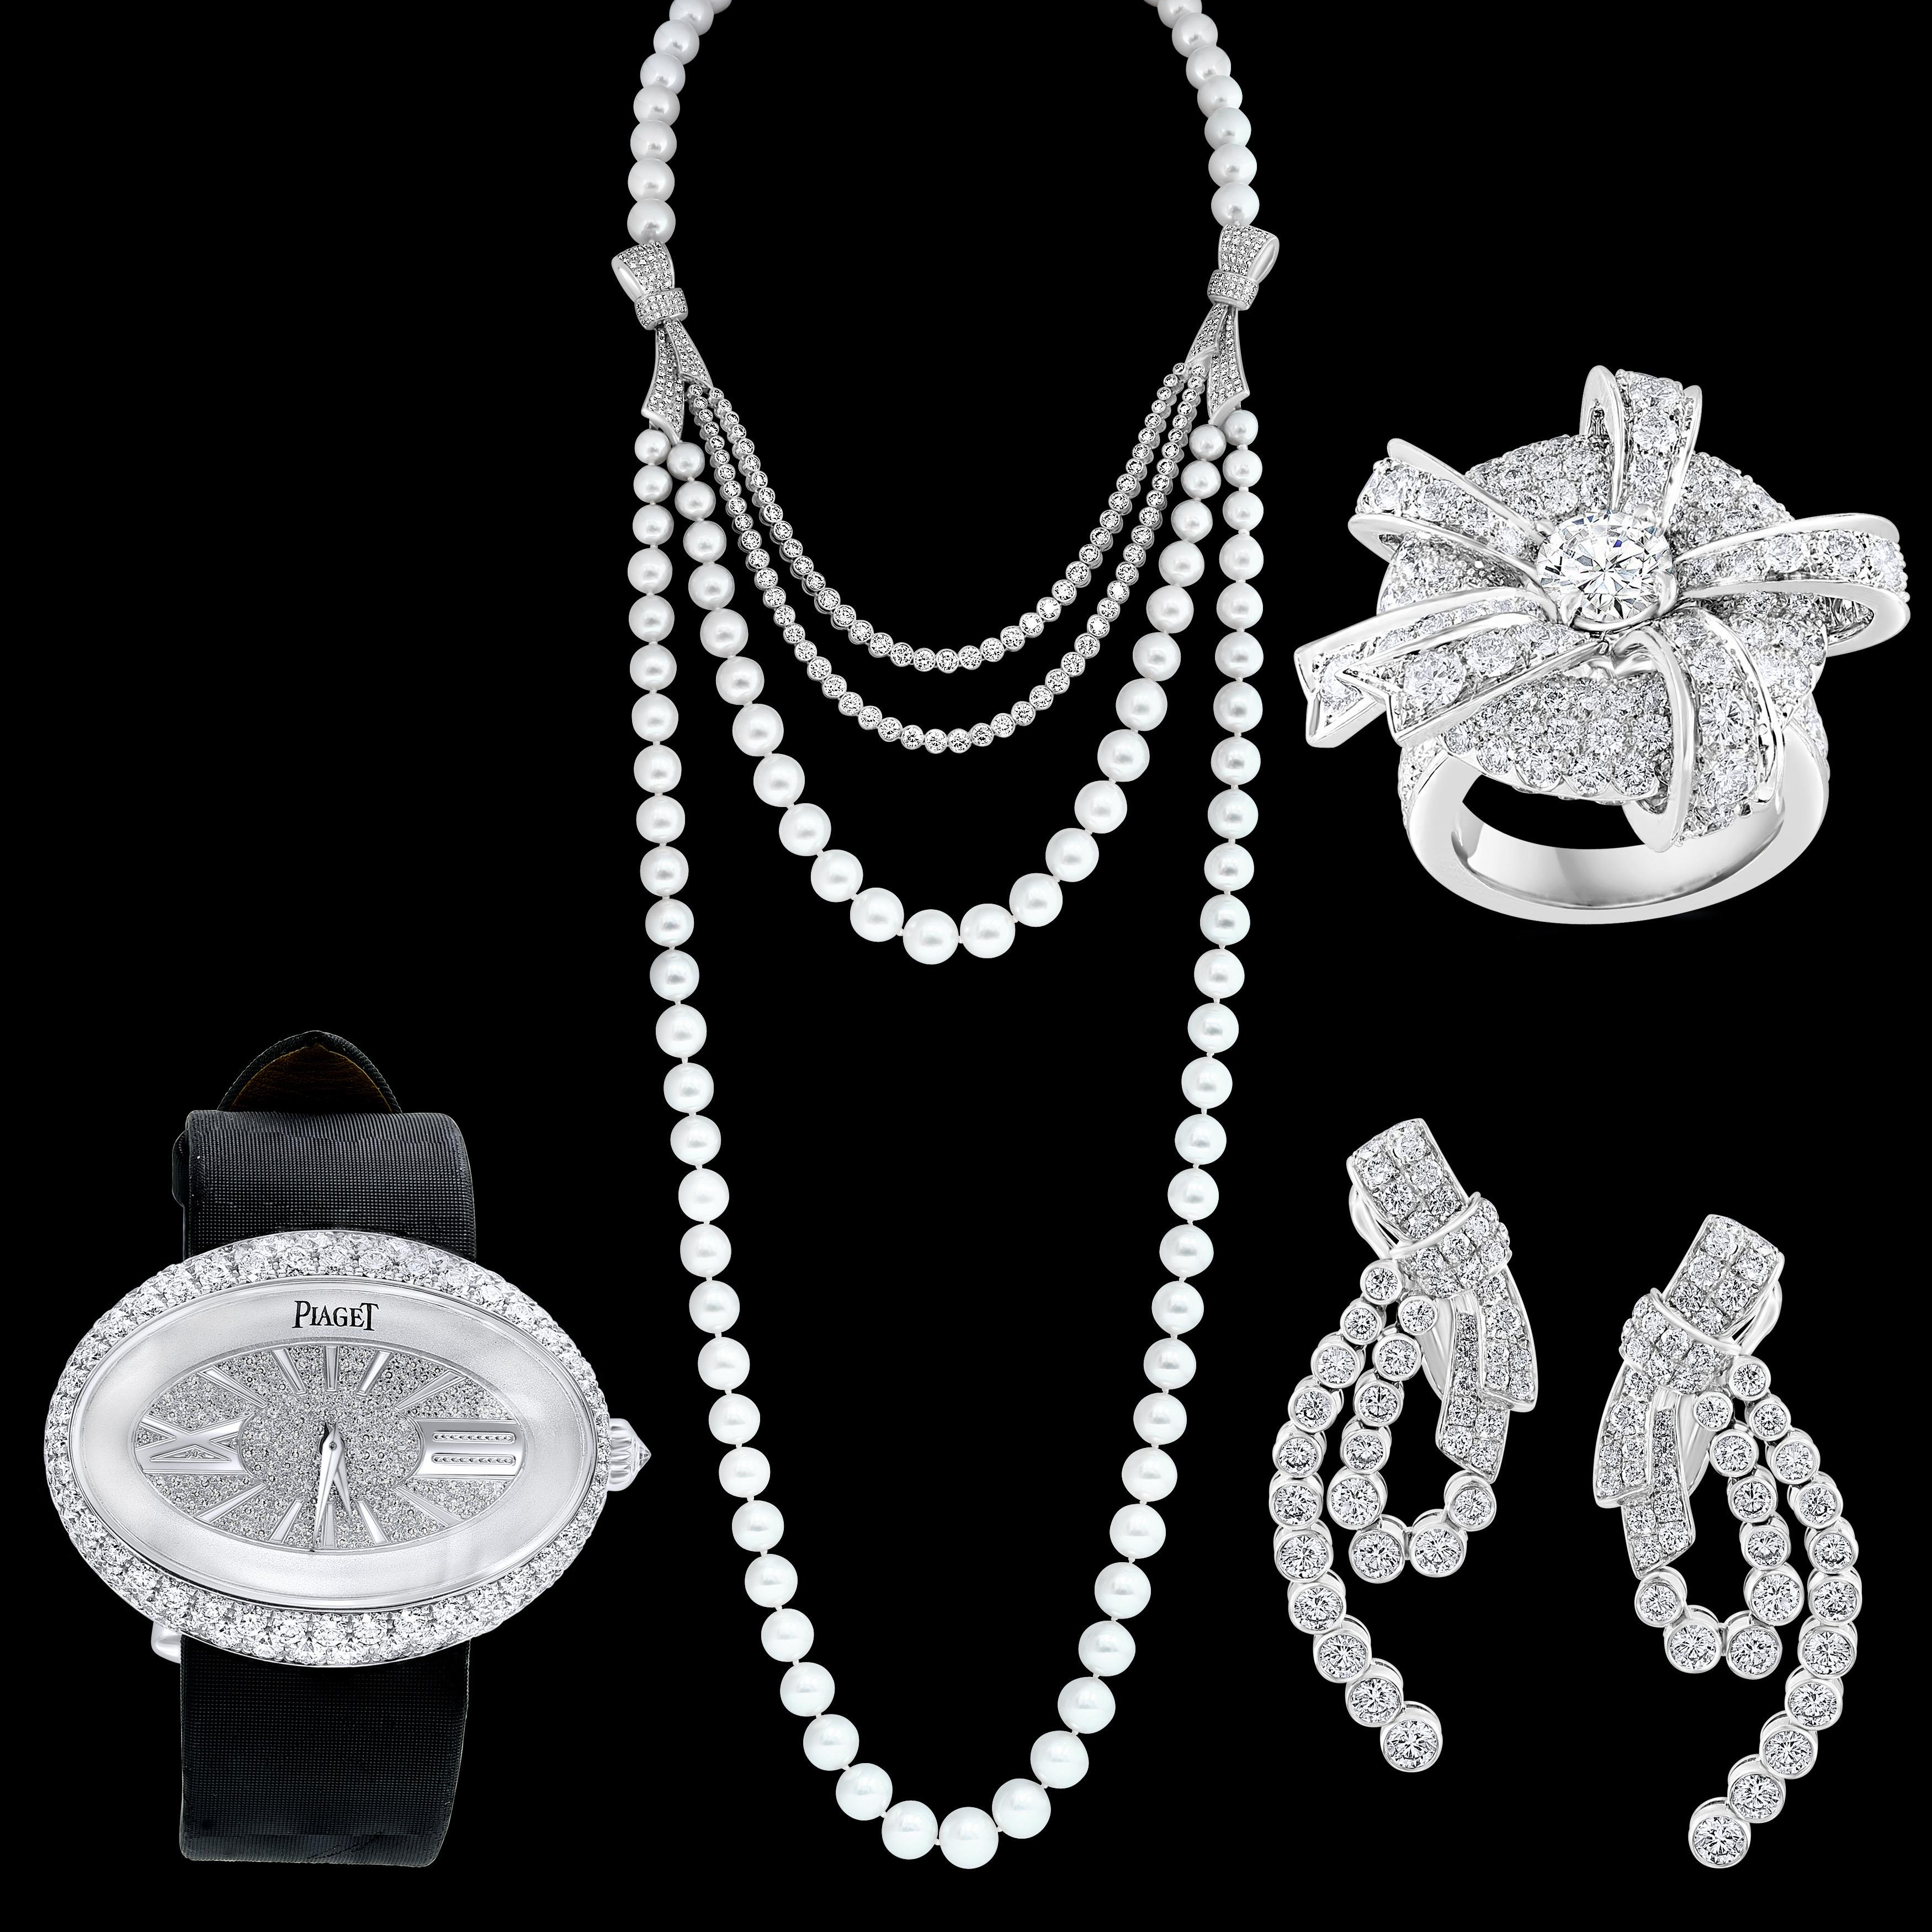 Piaget Paris Diamond & South Sea Pearl Suite Necklace, Earring Watch & Ring 18K For Sale 4